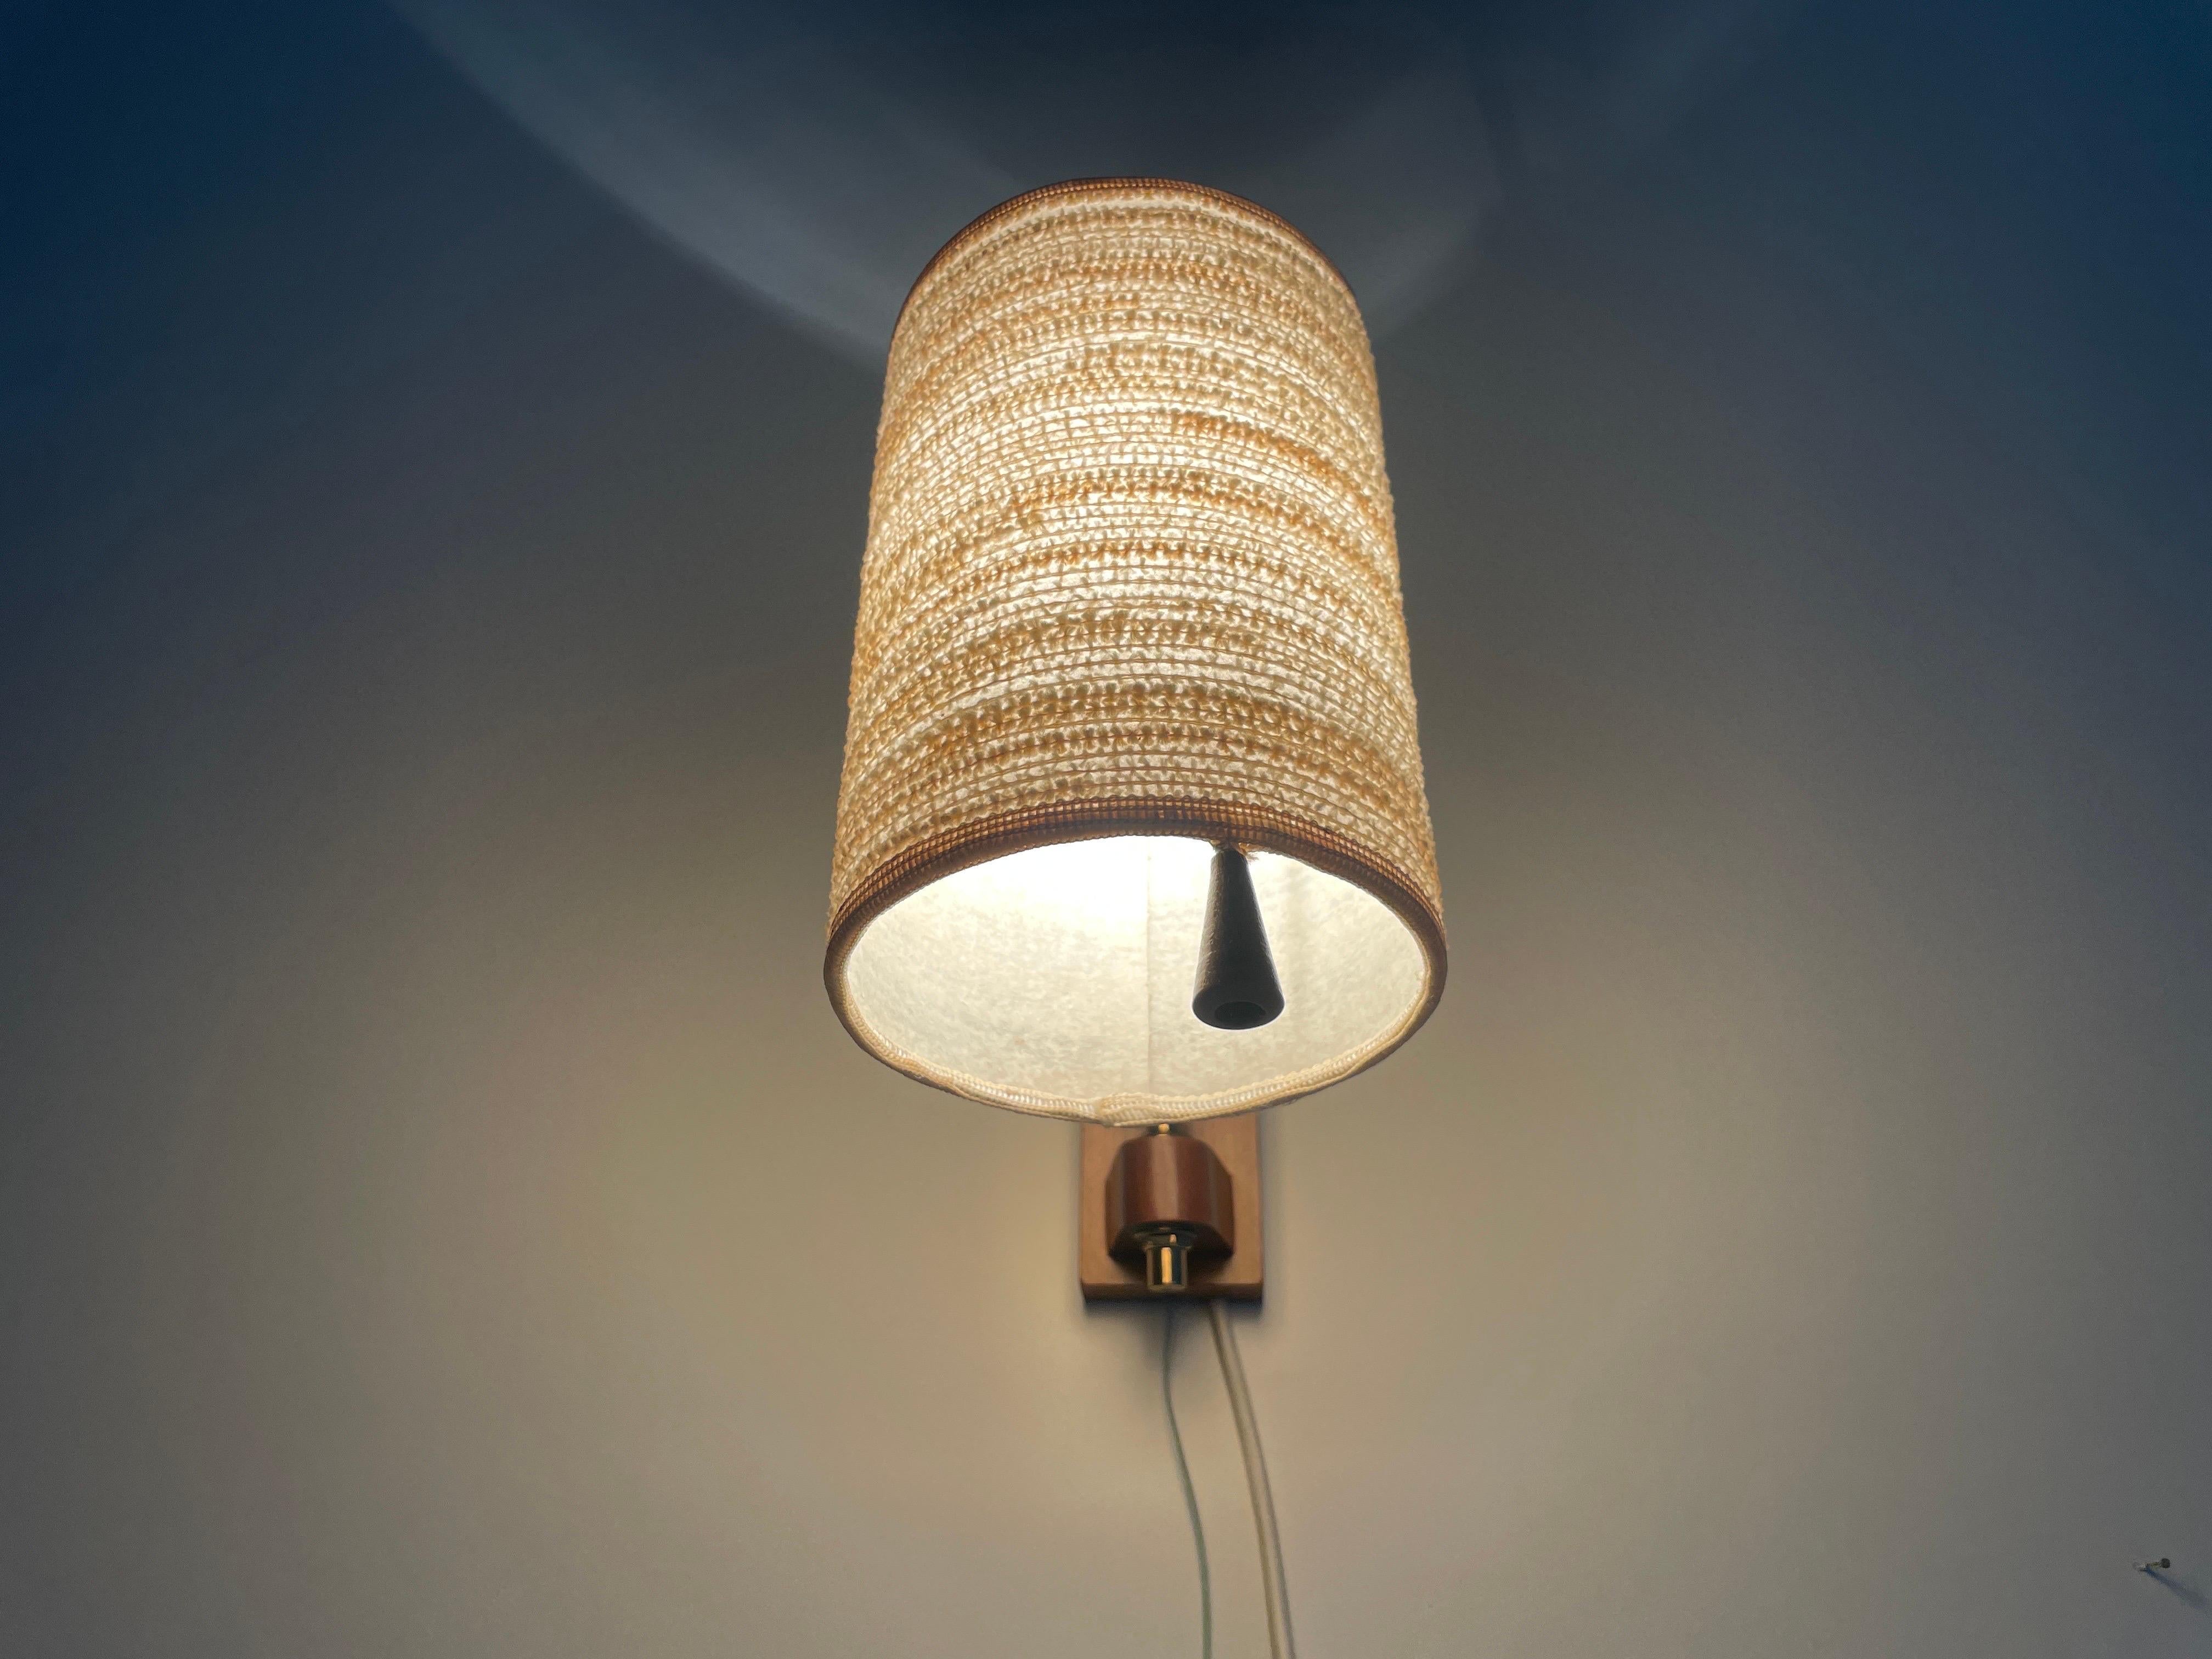 Fabric Shade and Wood Wall Lamp with Brass Neck, 1960s, Germany For Sale 7